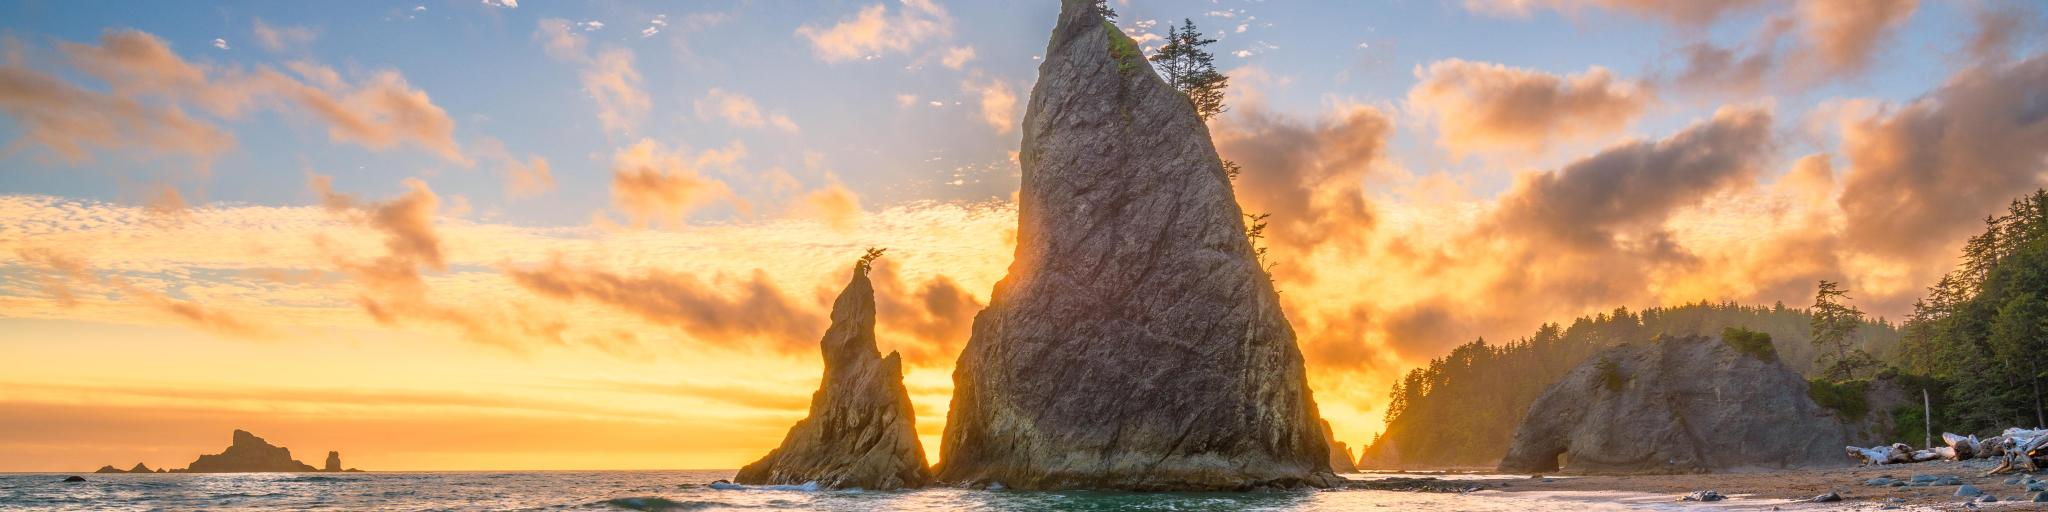 Rialto Beach in the national park, rock formation during sunset